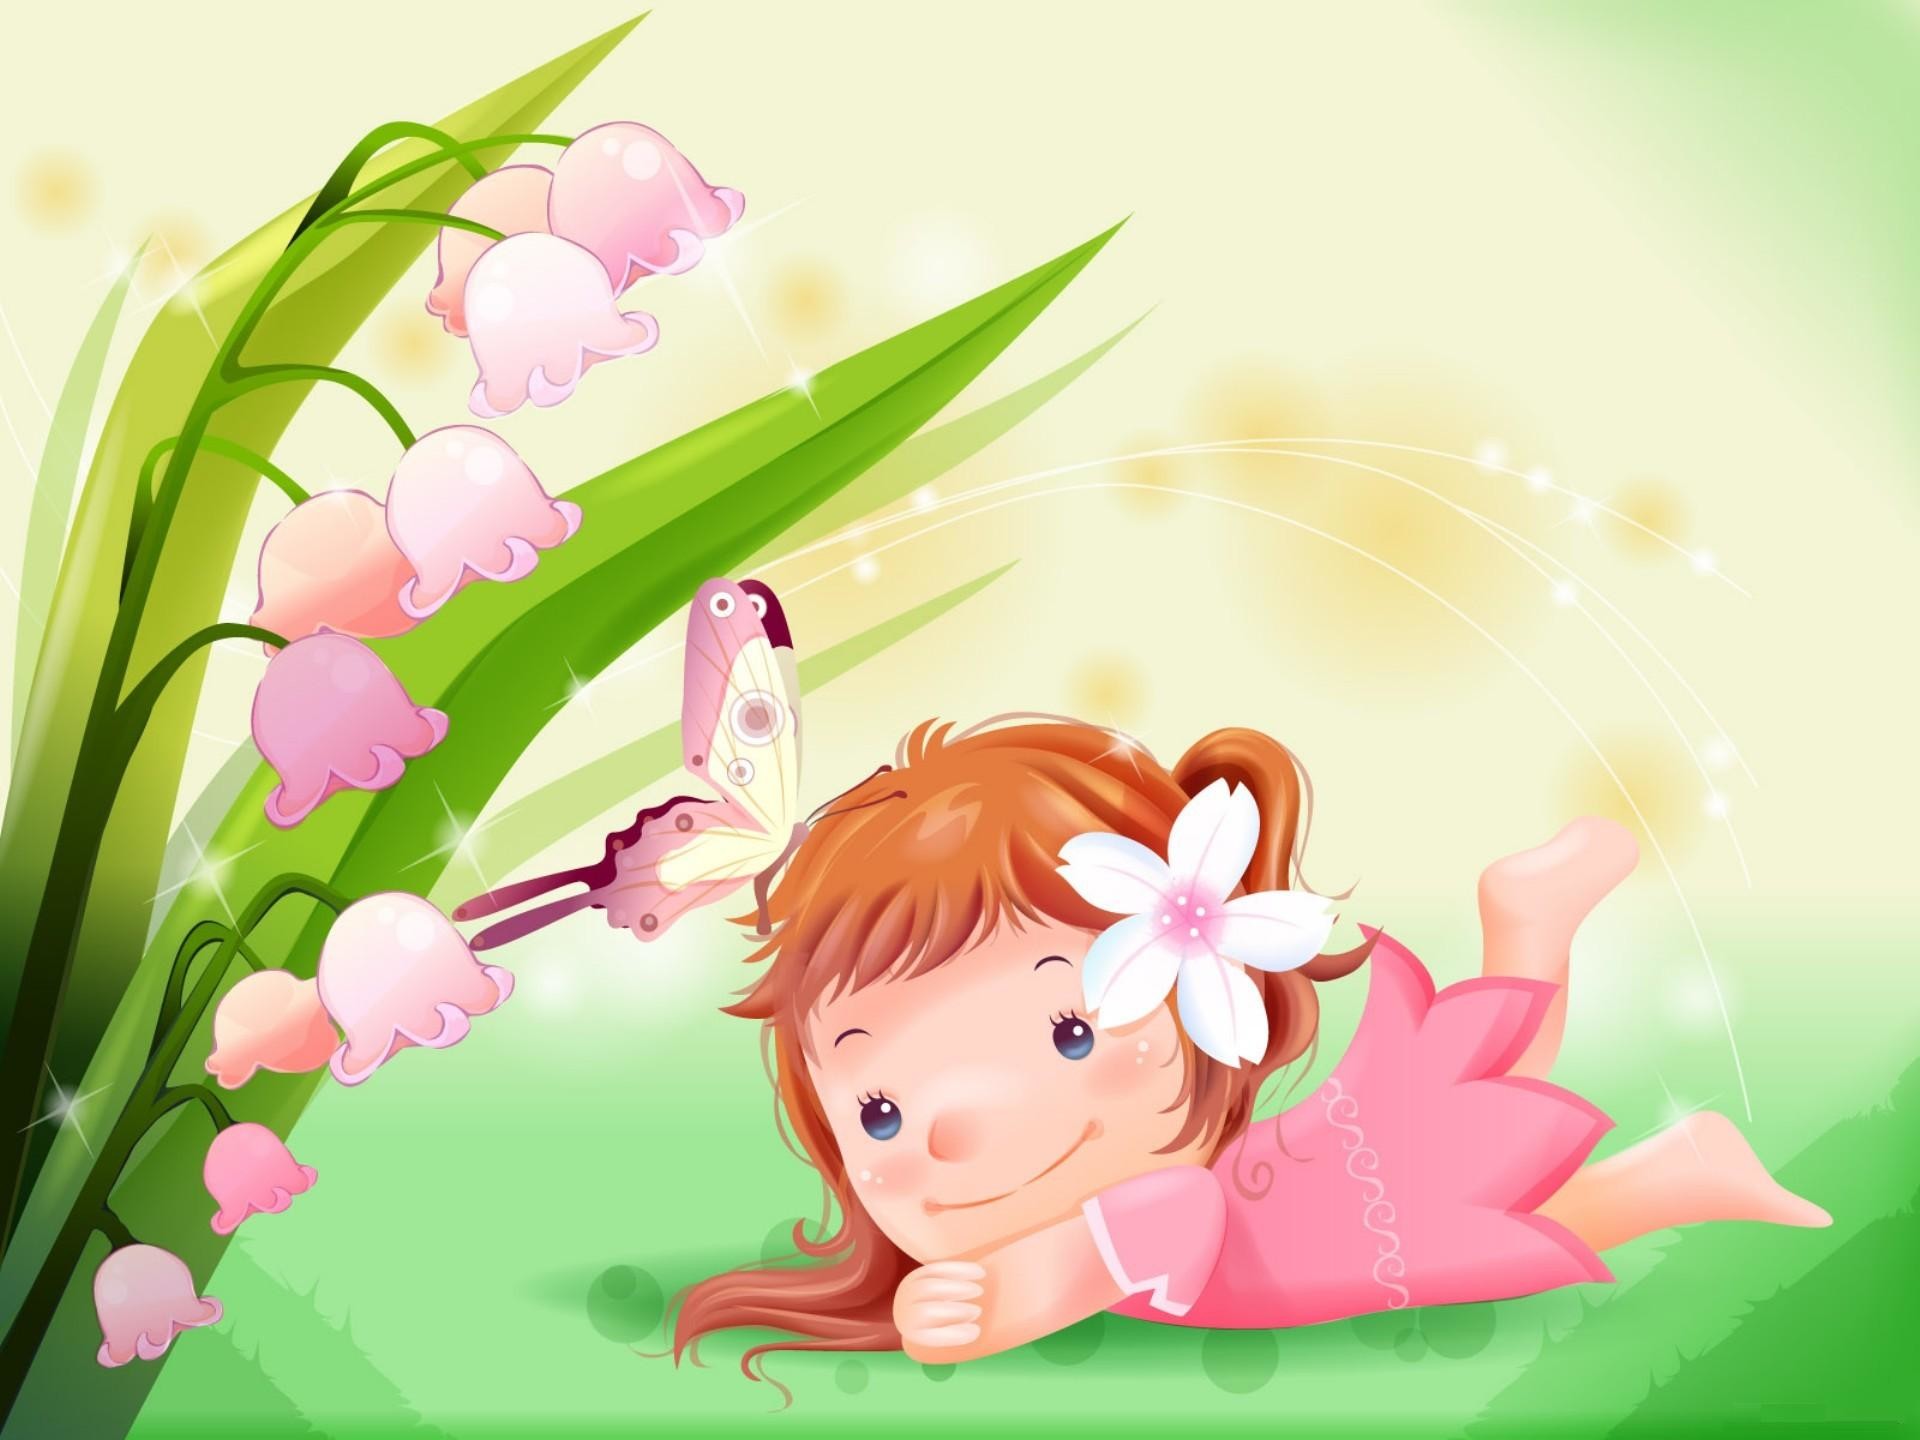 Cartoon Background Images 46 Pictures